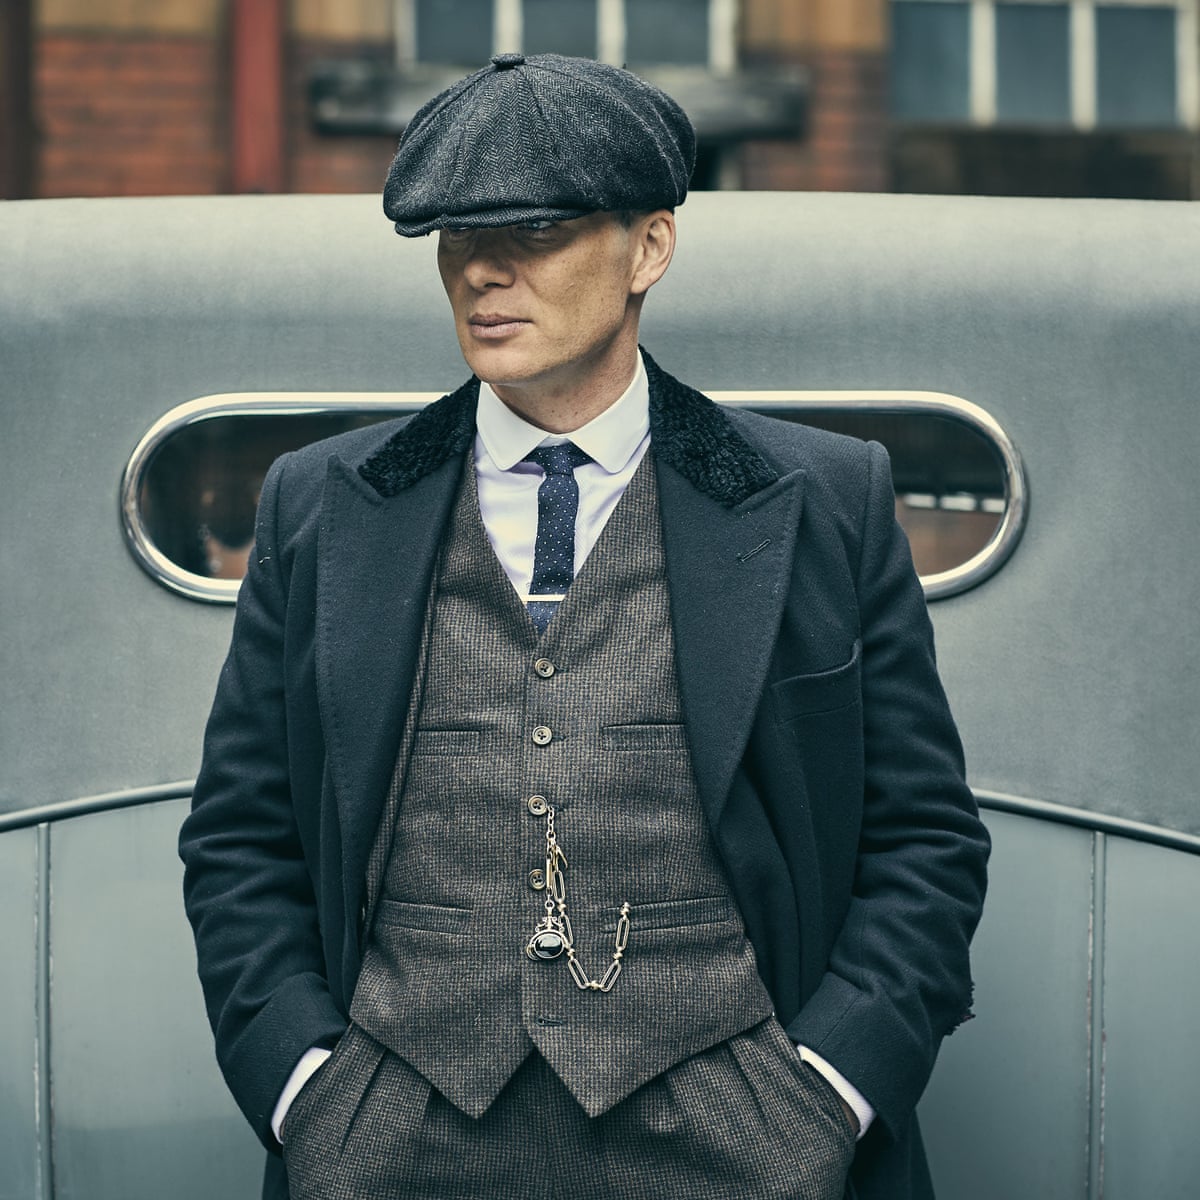 Kreet Vet Prestige The rise of flat caps: genuinely classless – or a way for wealthy men to  seem authentic? | Fashion | The Guardian